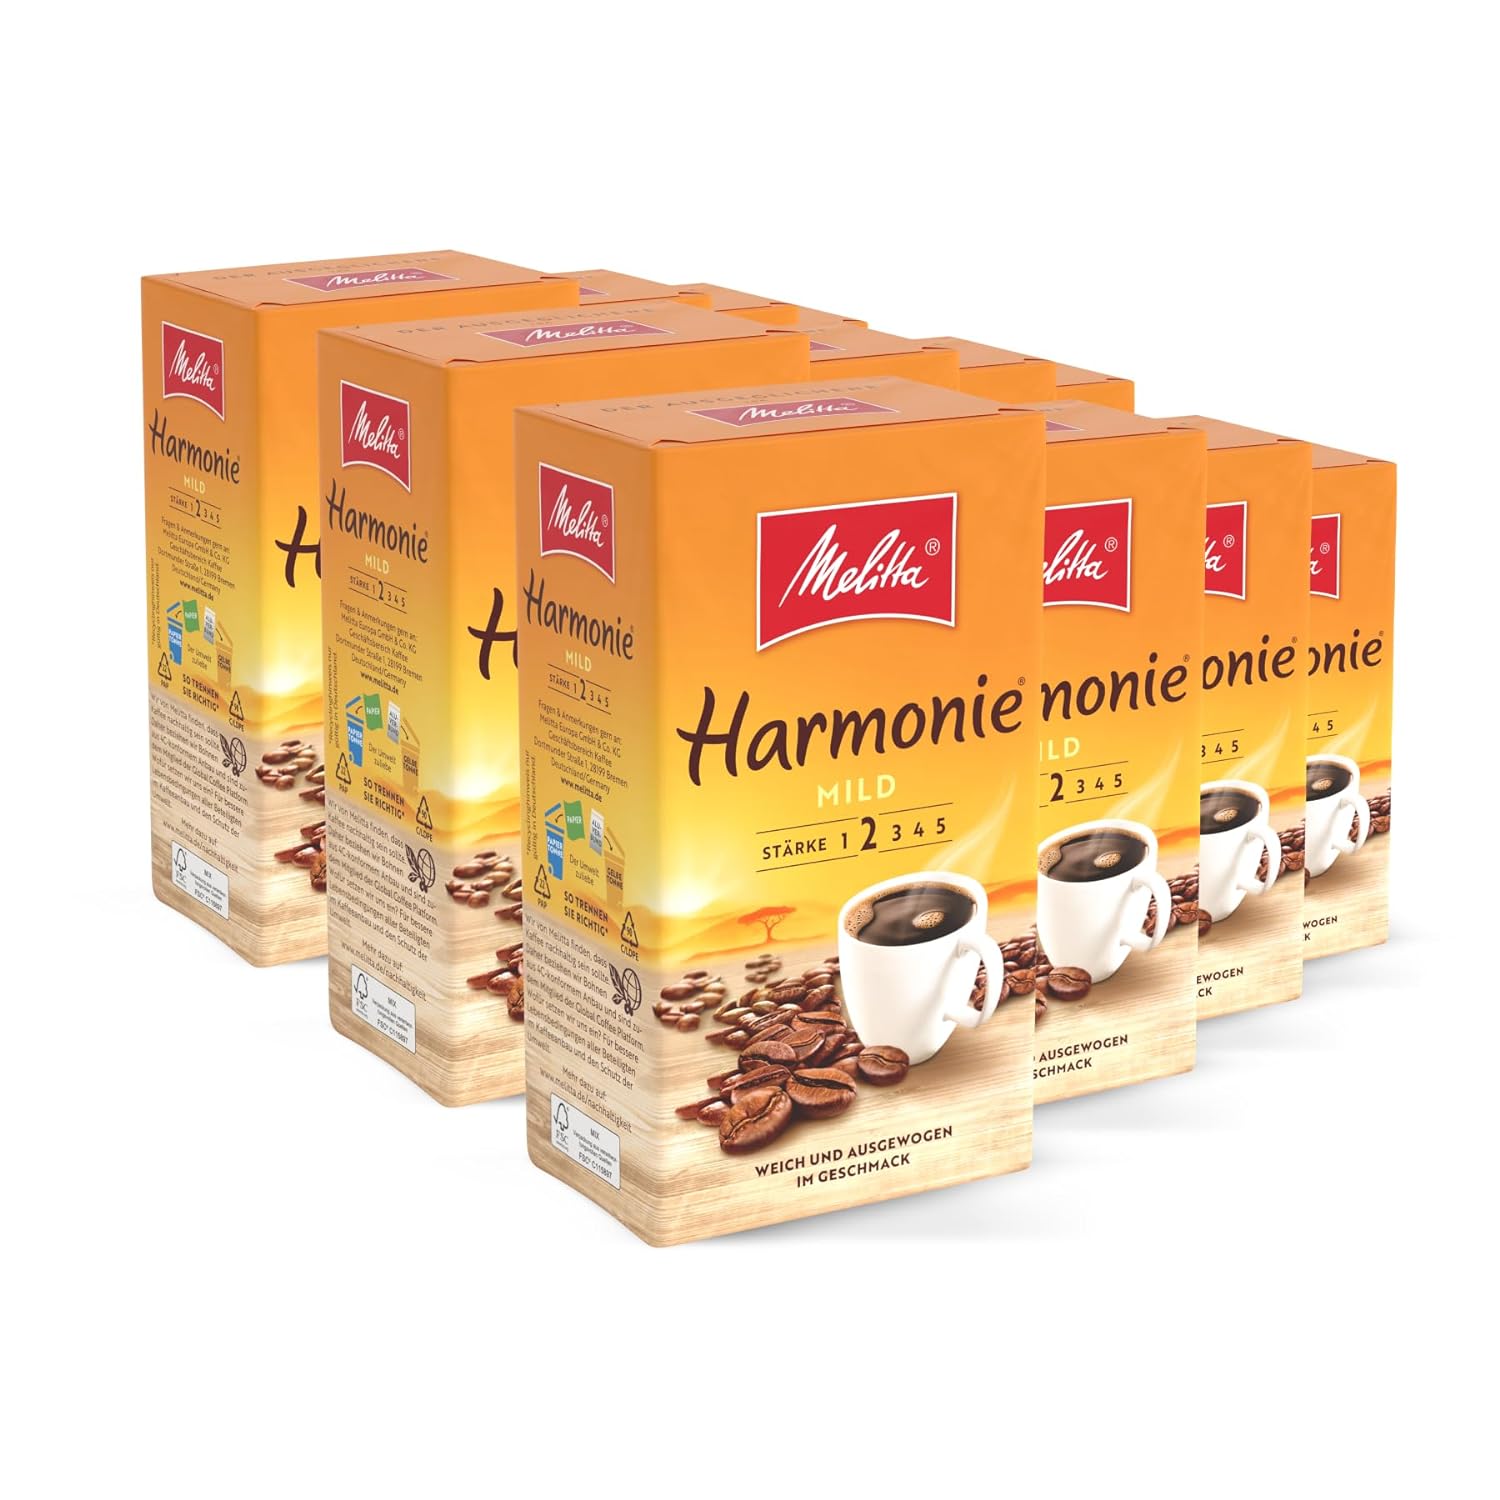 Melitta Harmonie Mild Filter Coffee 12 x 500 g, Ground, Powder for Filter Coffee Machines, Mild Roasting, Roasted in Germany, in Tray